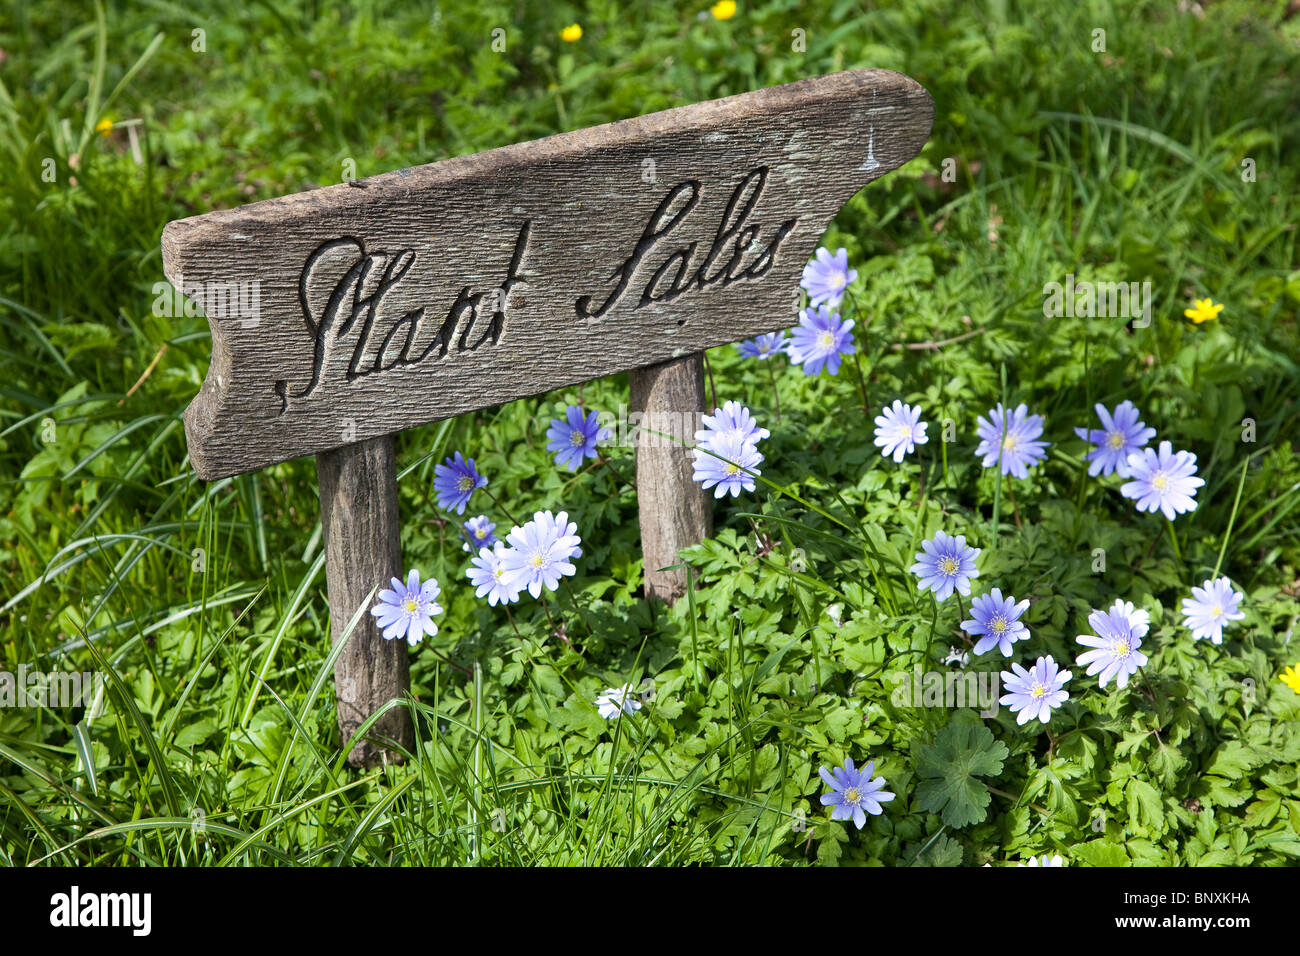 Plant sales sign carved in wood England UK Stock Photo